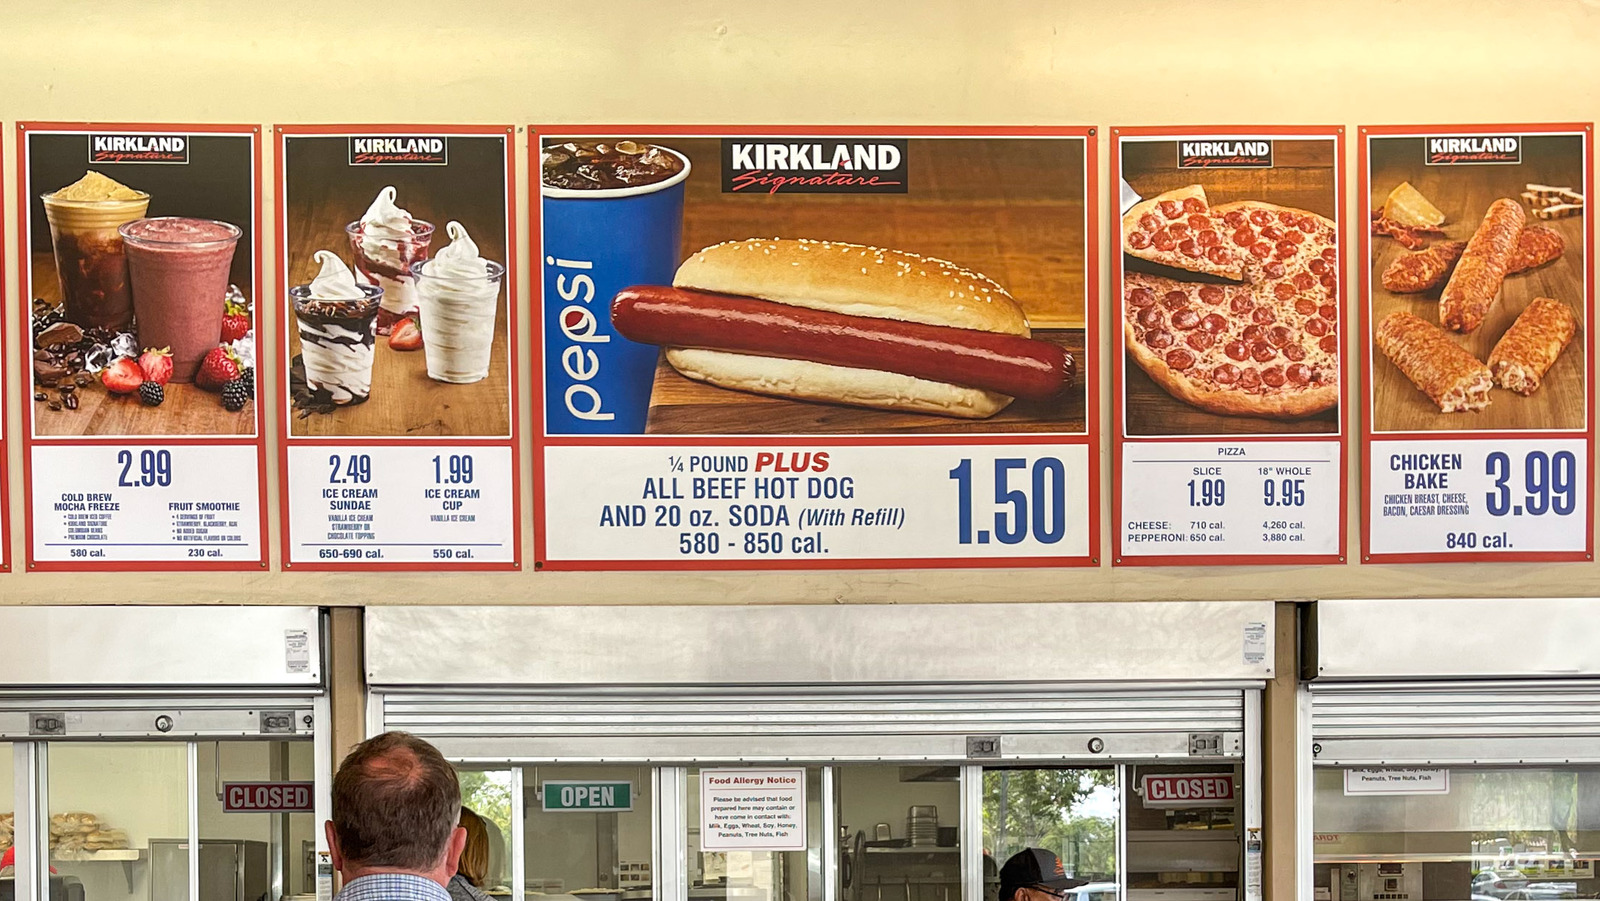 Costco's $1.50 hot dog combo is now an official Monopoly game piece